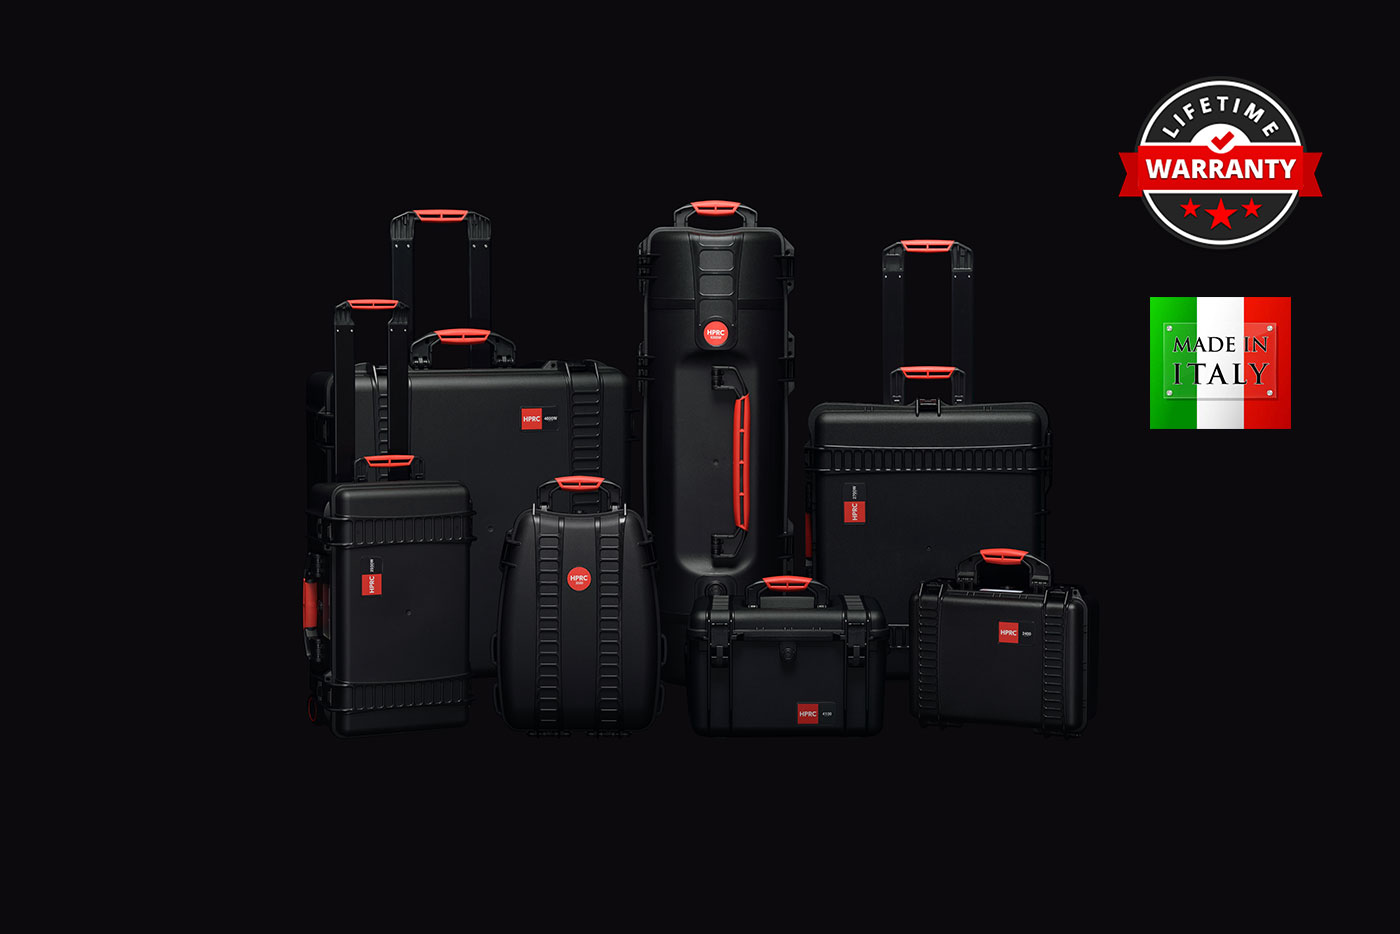 HPRC Cases - High Performance Resin Cases with a Lifetime Warranty